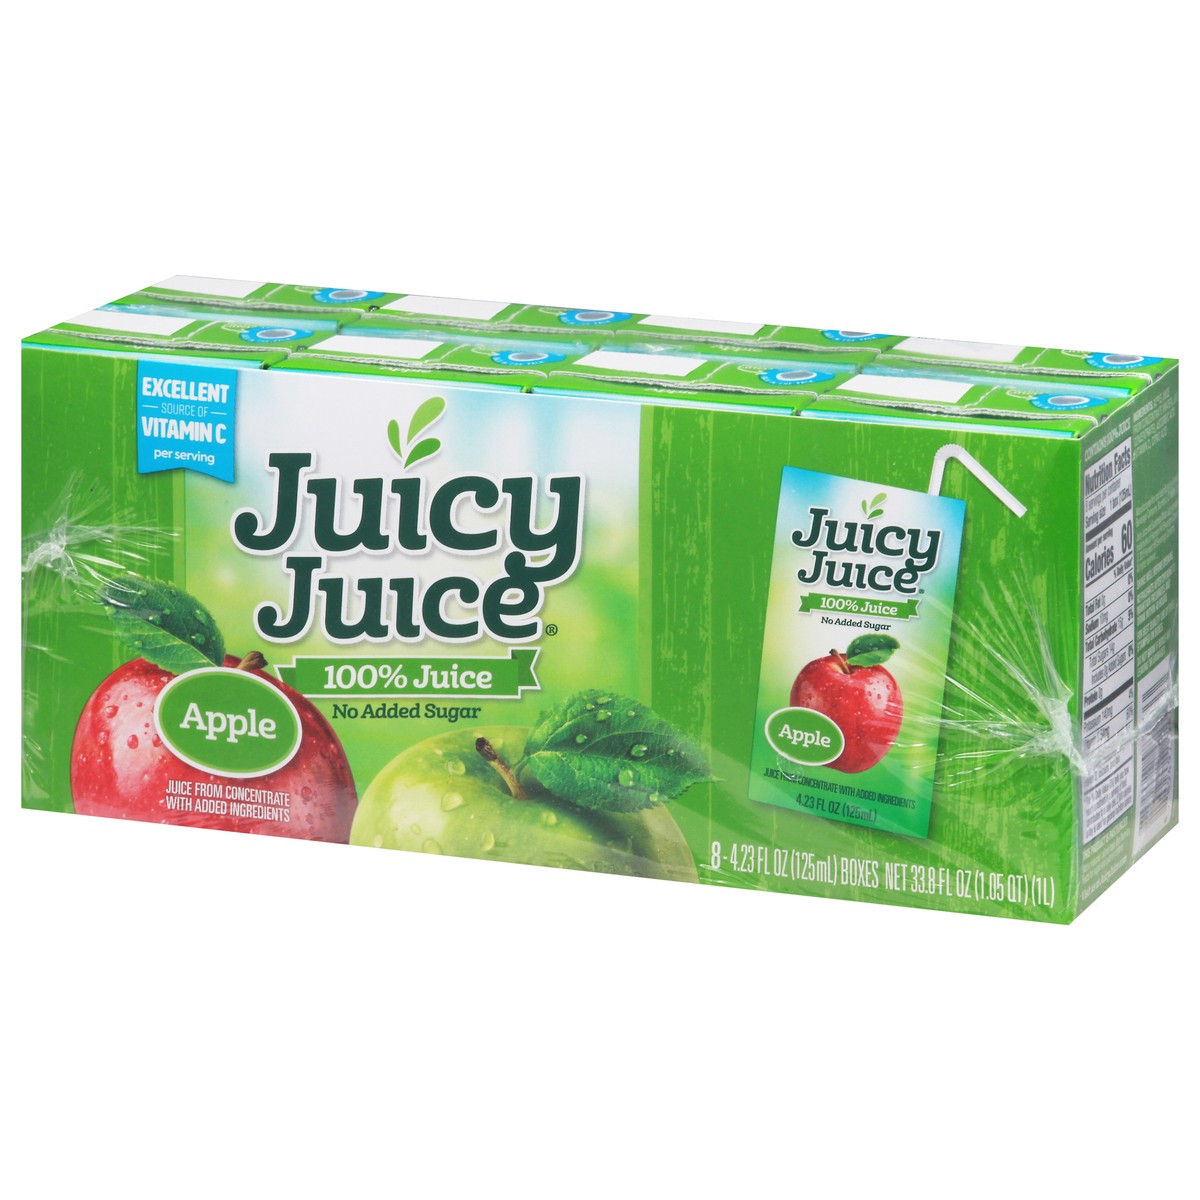 Metric-sized juices and fruit drinks – US Metric Association